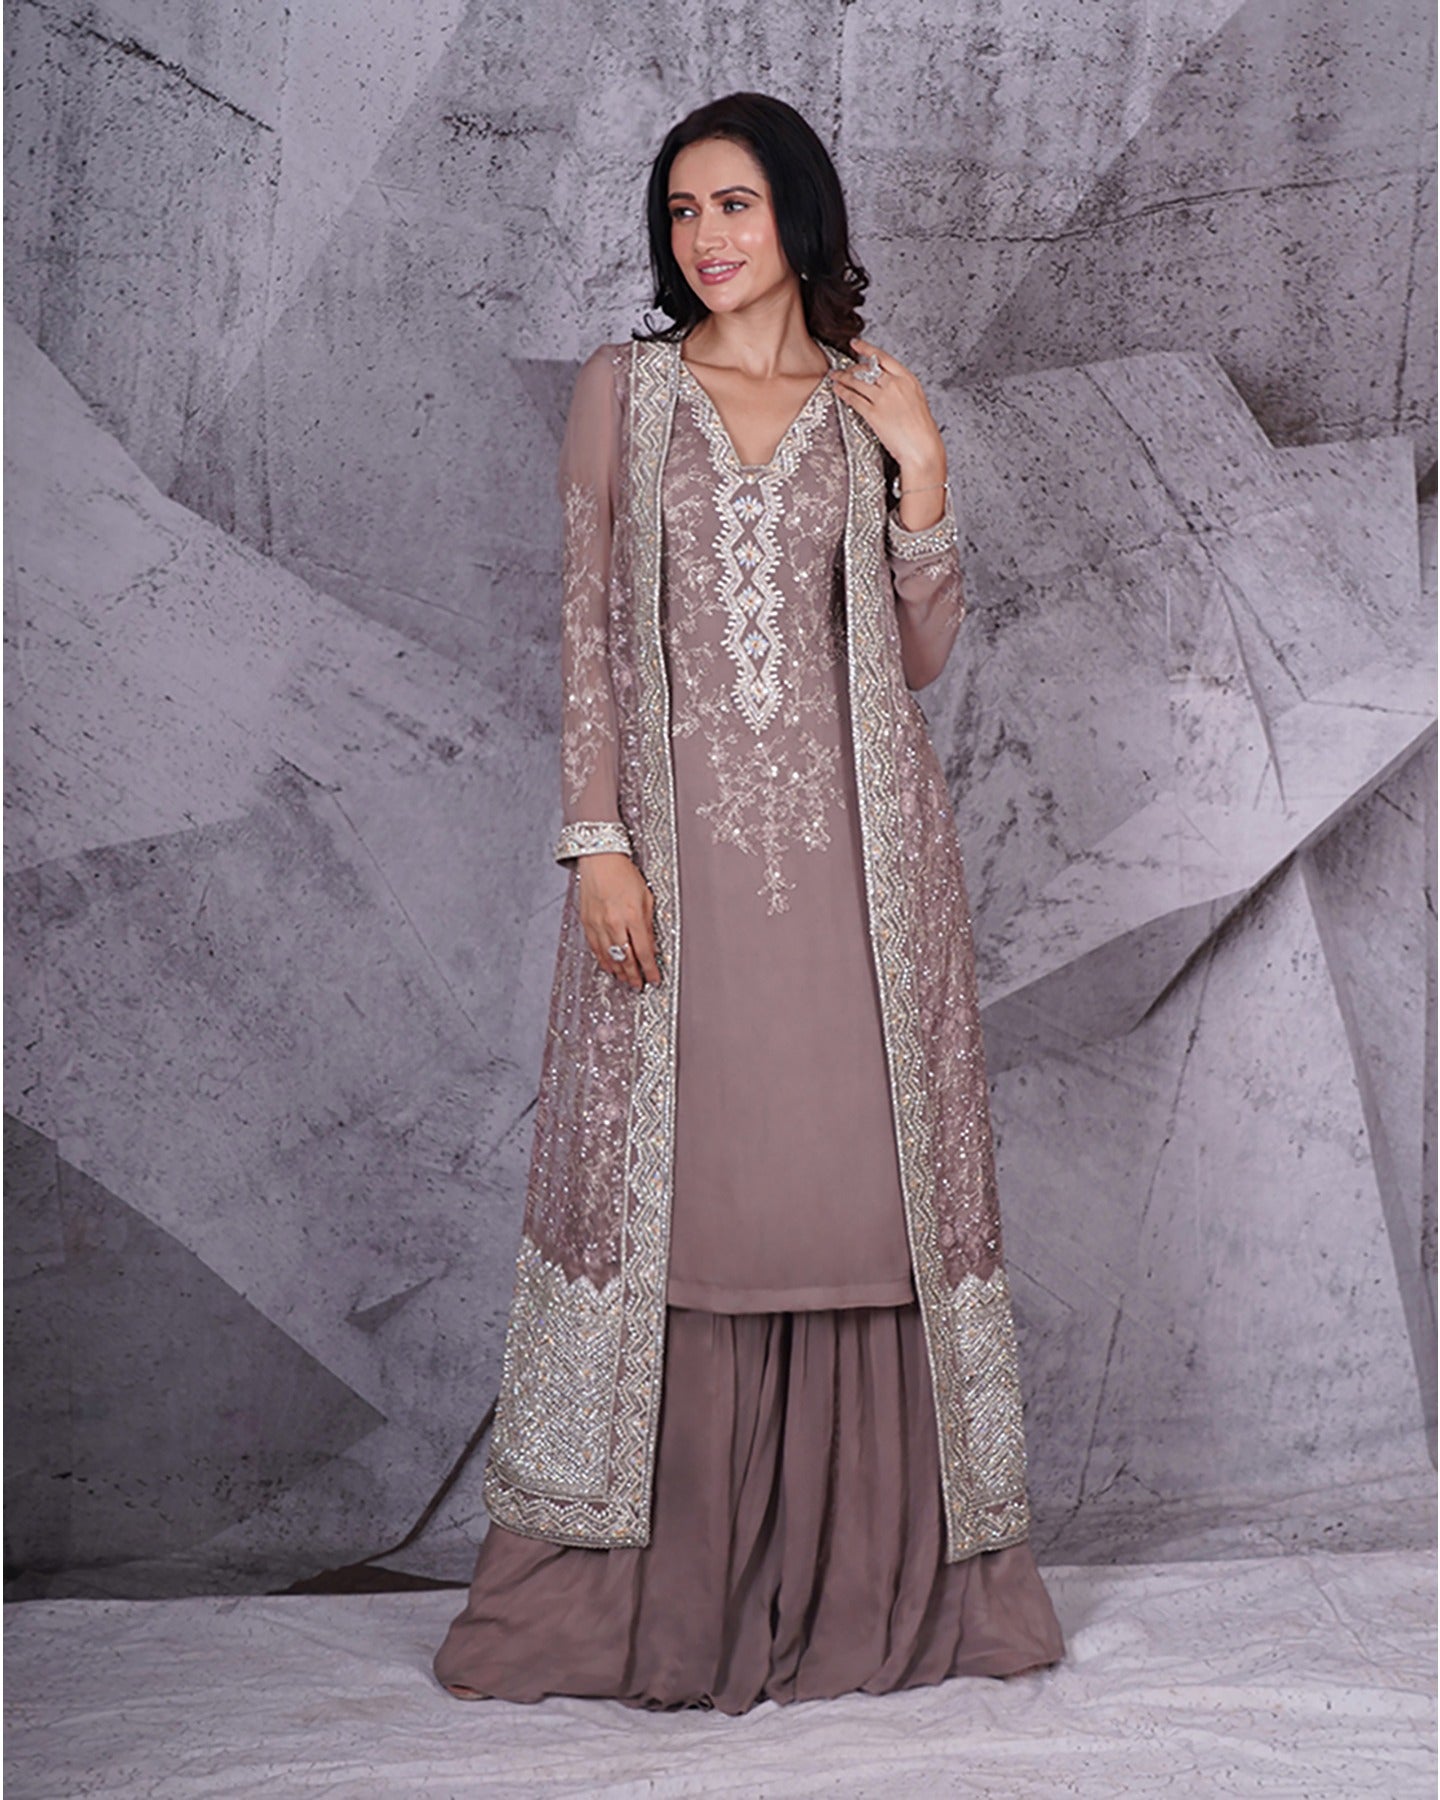 Draped in the sophistication of grey, this jacket sharara set blooms with shimmering floral silver embroidery.